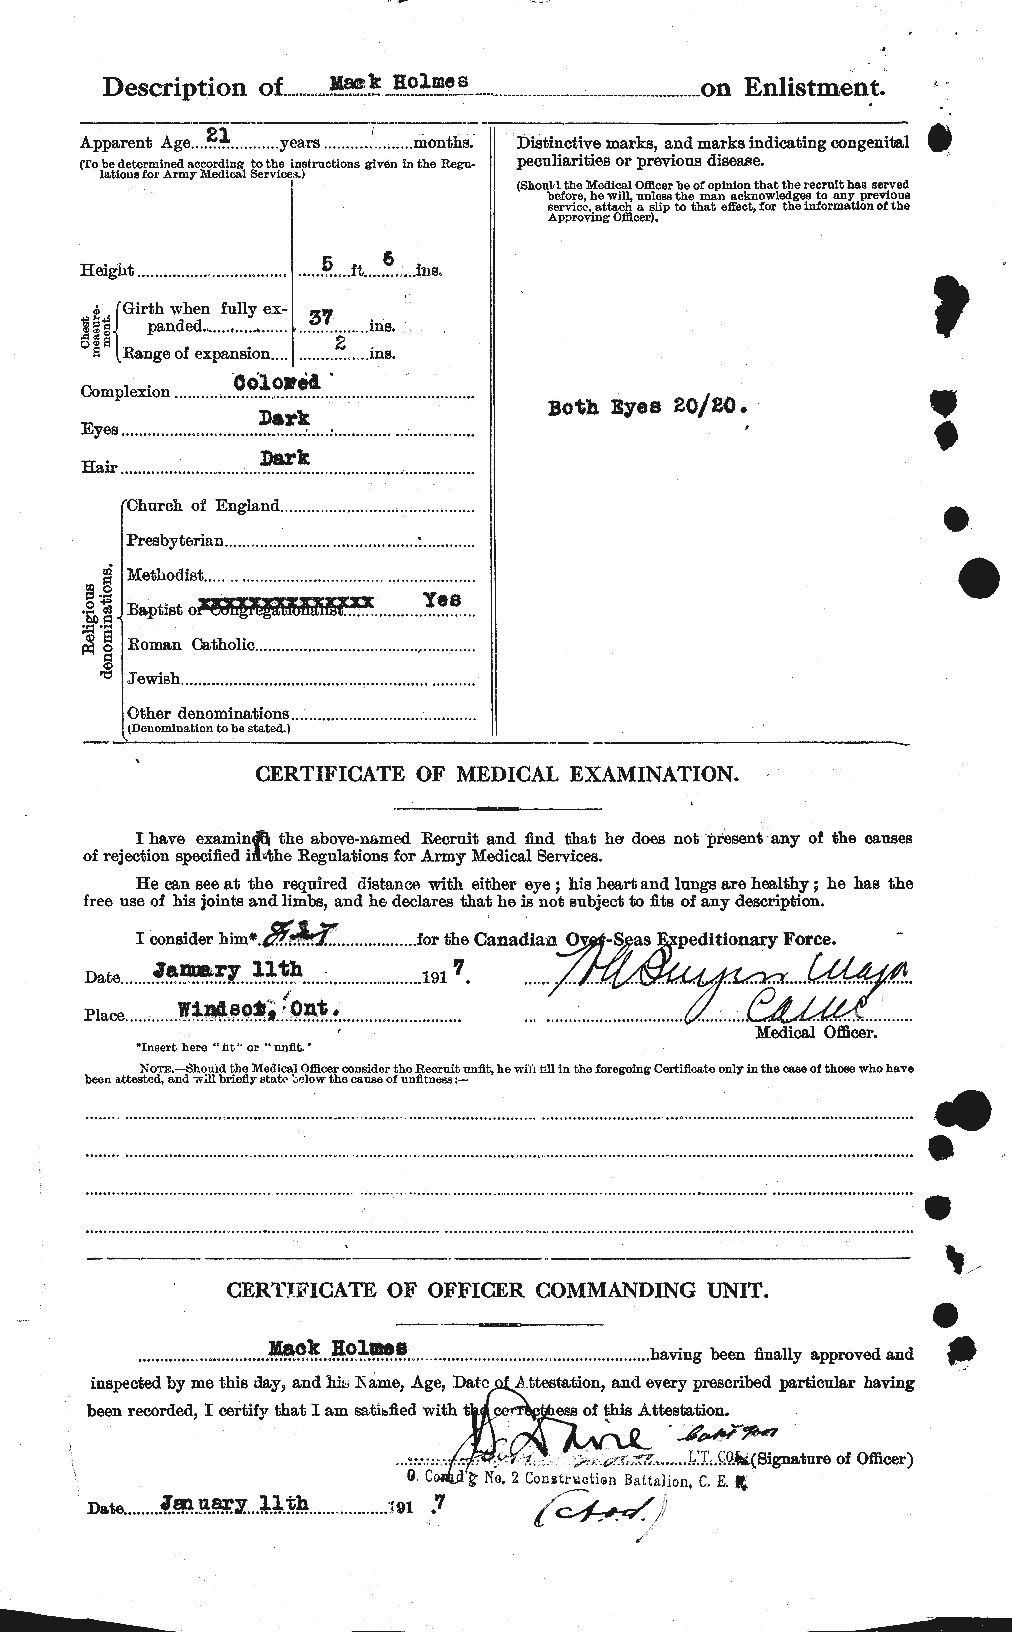 Personnel Records of the First World War - CEF 401845b